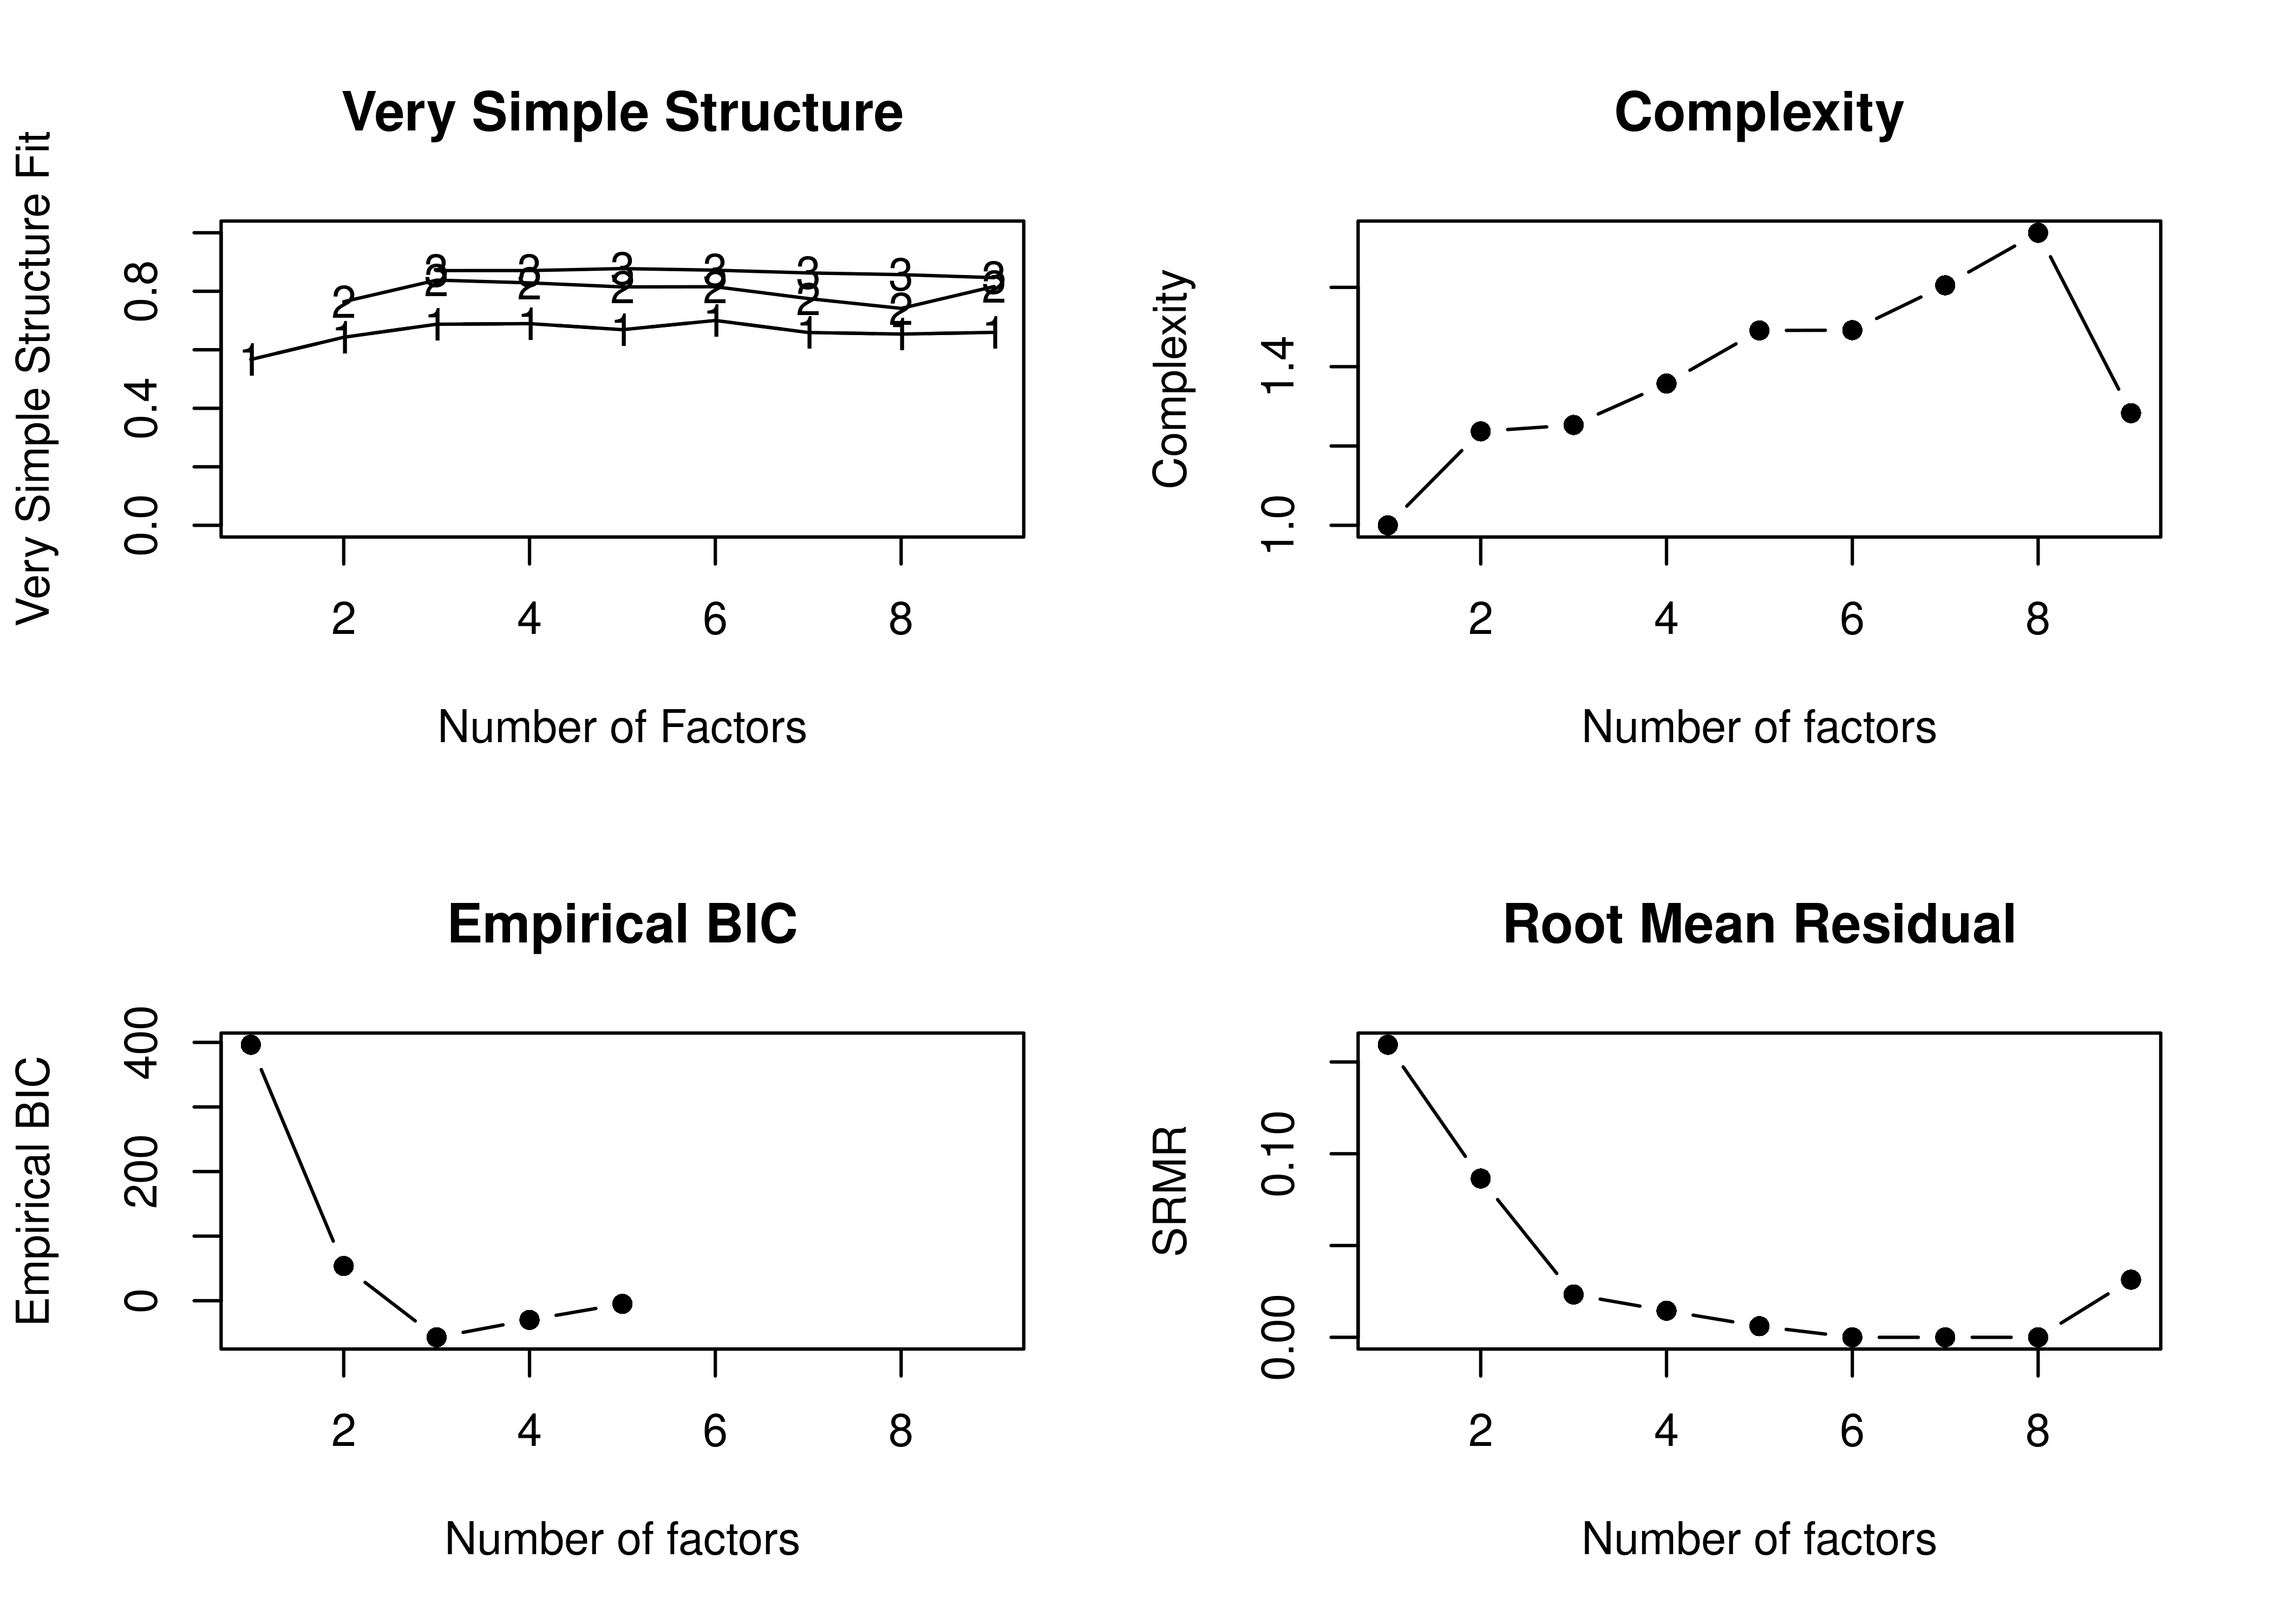 Very Simple Structure-Related Indices With Orthogonal Rotation in Exploratory Factor Analysis.